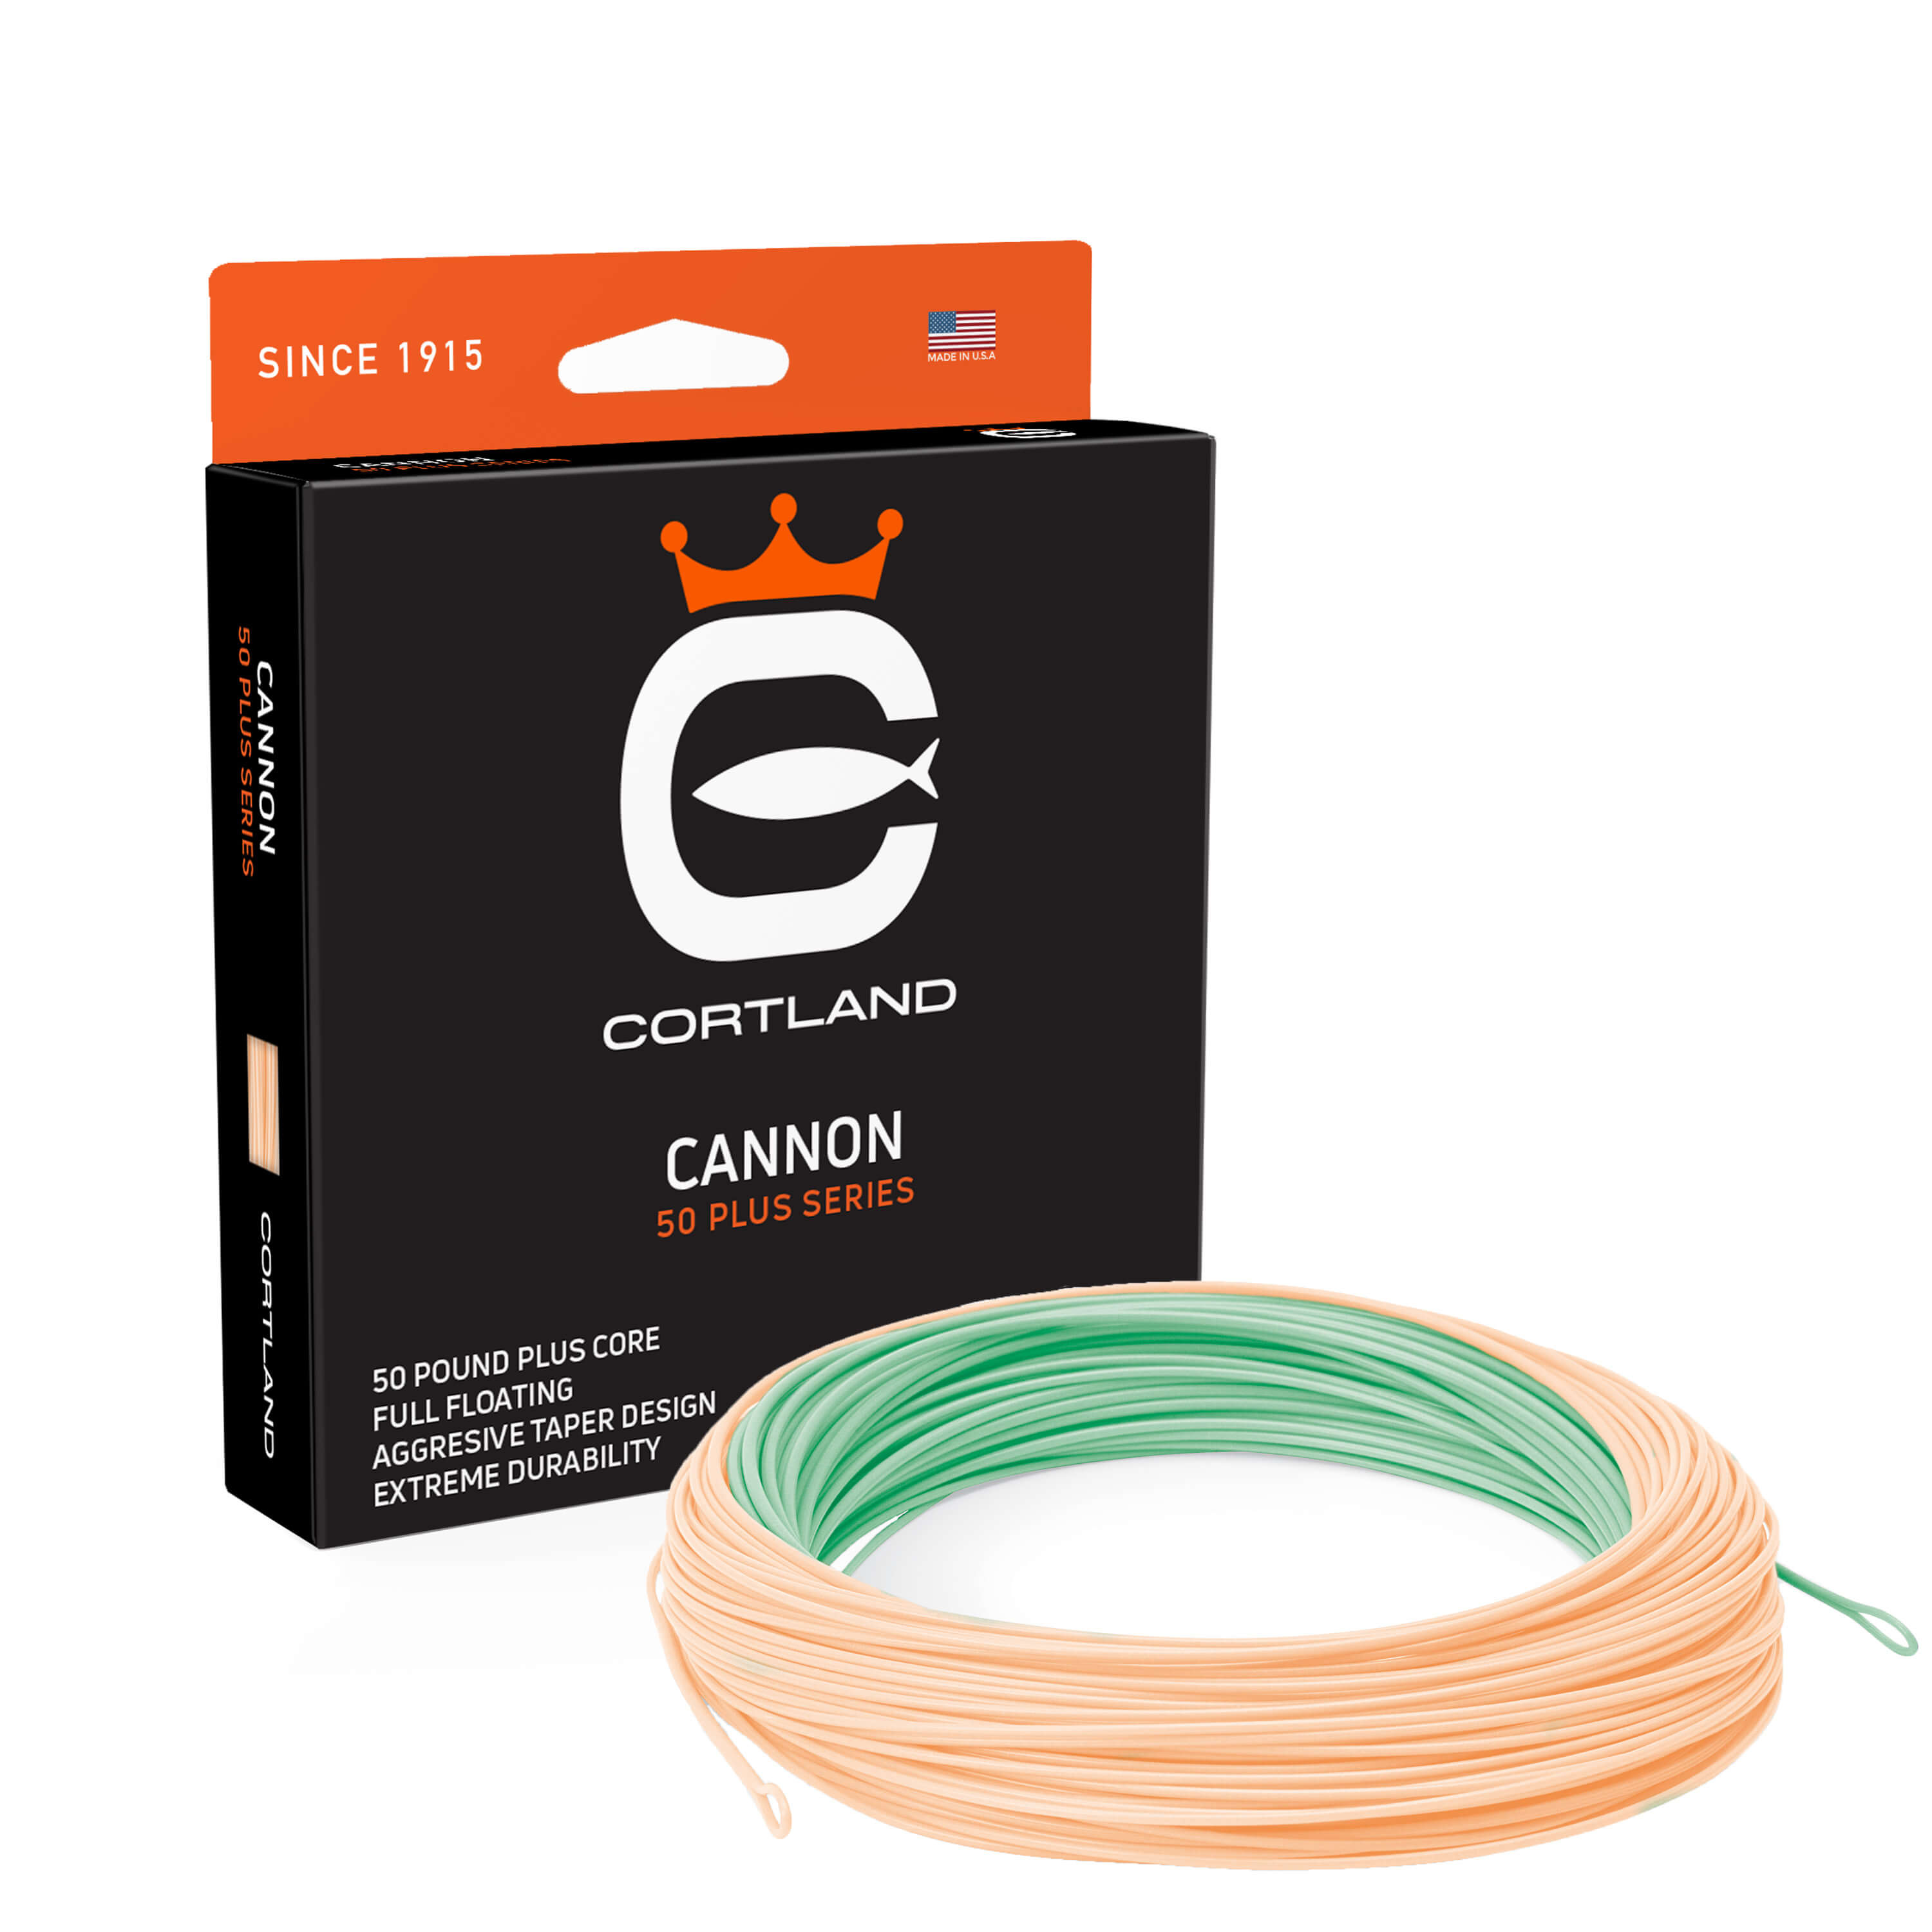 Cortland 50+ Series Cannon Fly Line WF12F